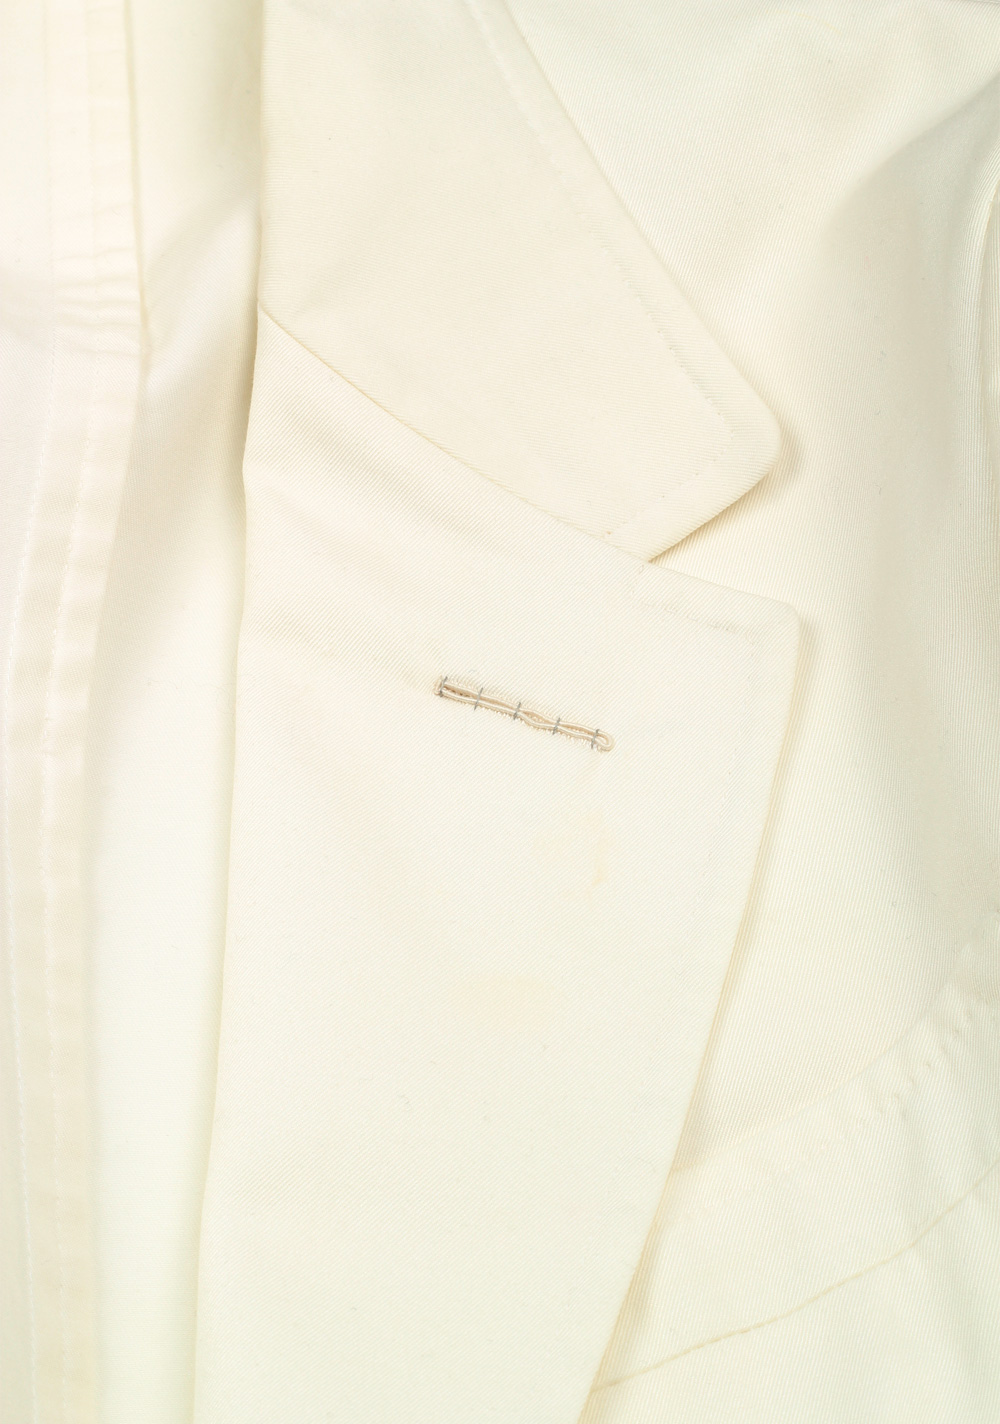 TOM FORD Shelton Off White Sport Coat Size 46 / 36R U.S. In Cotton | Costume Limité